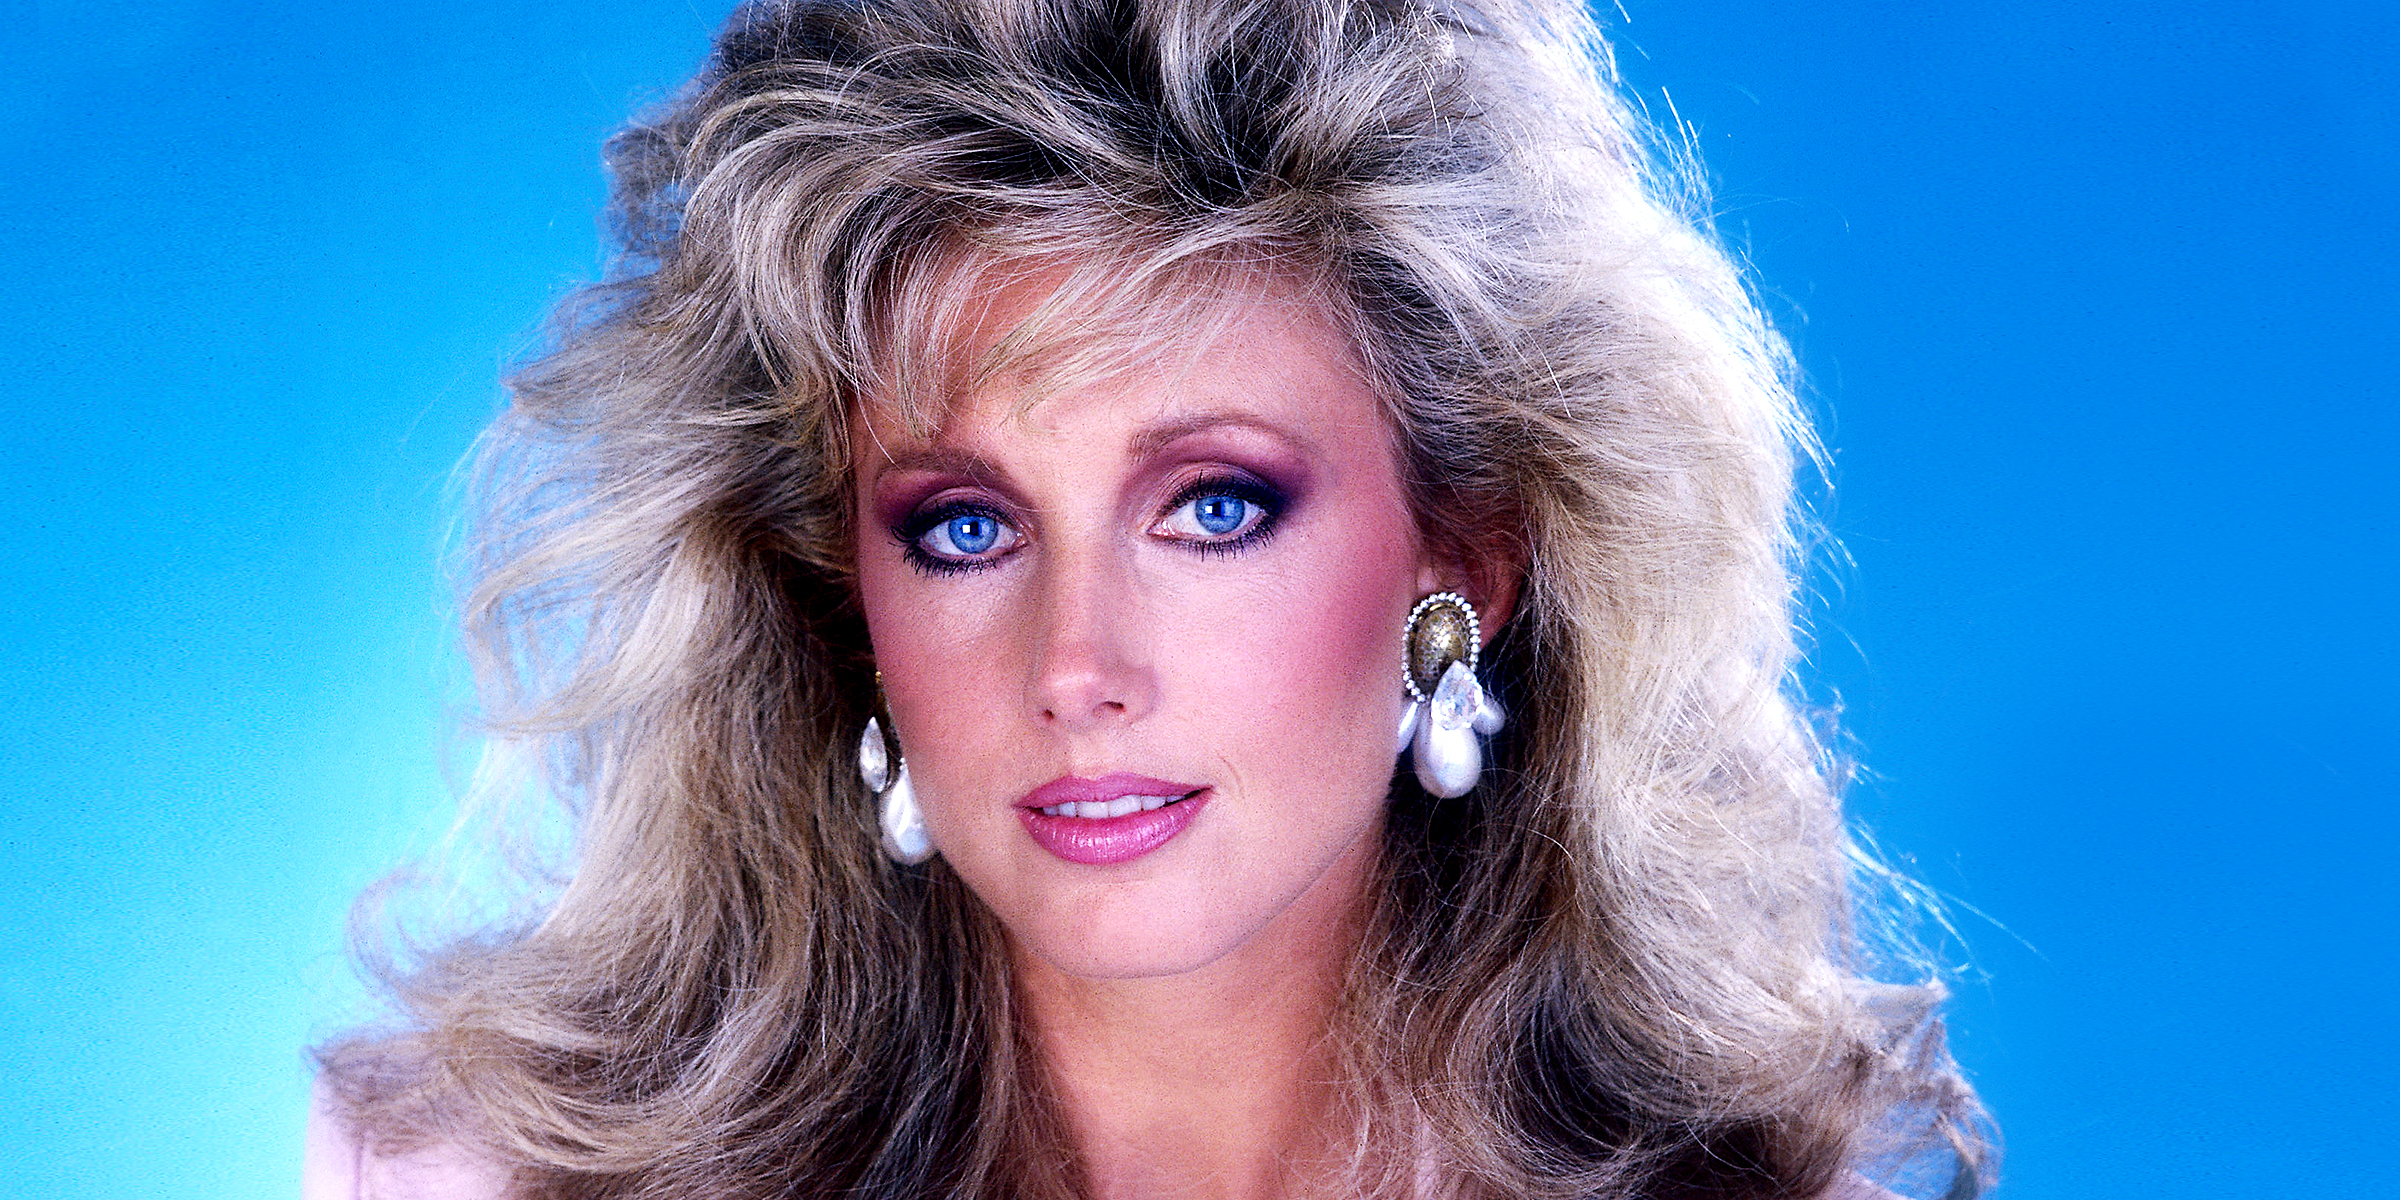 Morgan Fairchild | Source : Getty Images